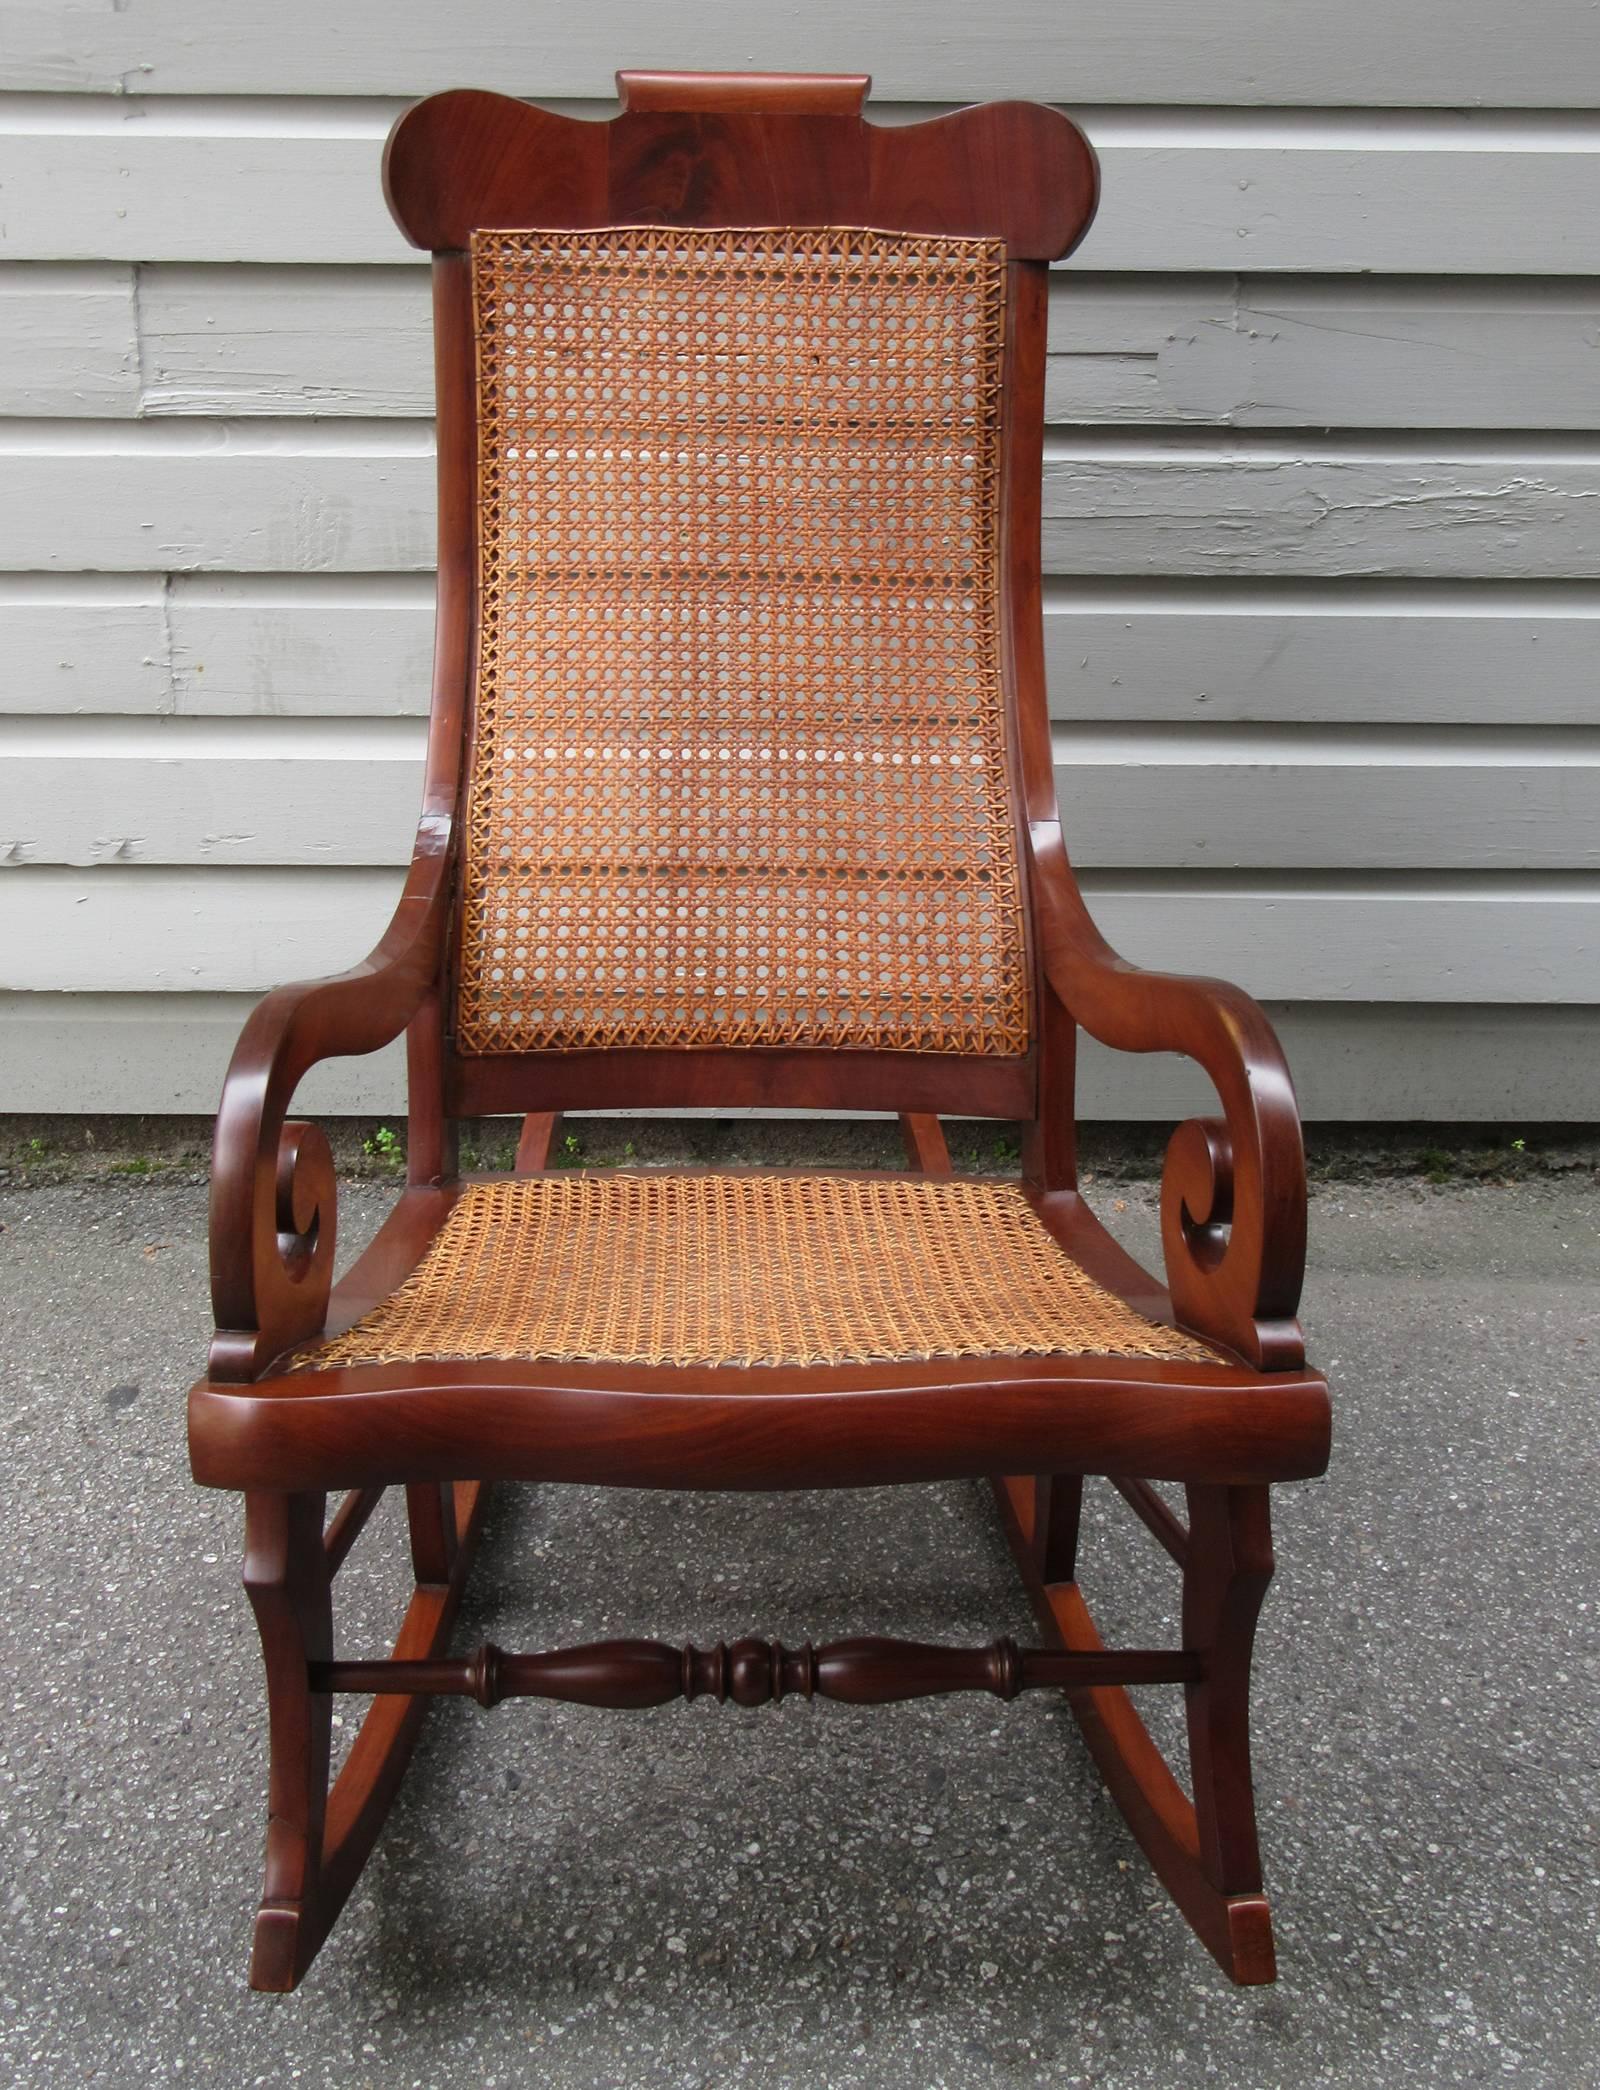 Virgin Islands 19th Century St. Croix Regency Mahogany and Cane Rocking Chair